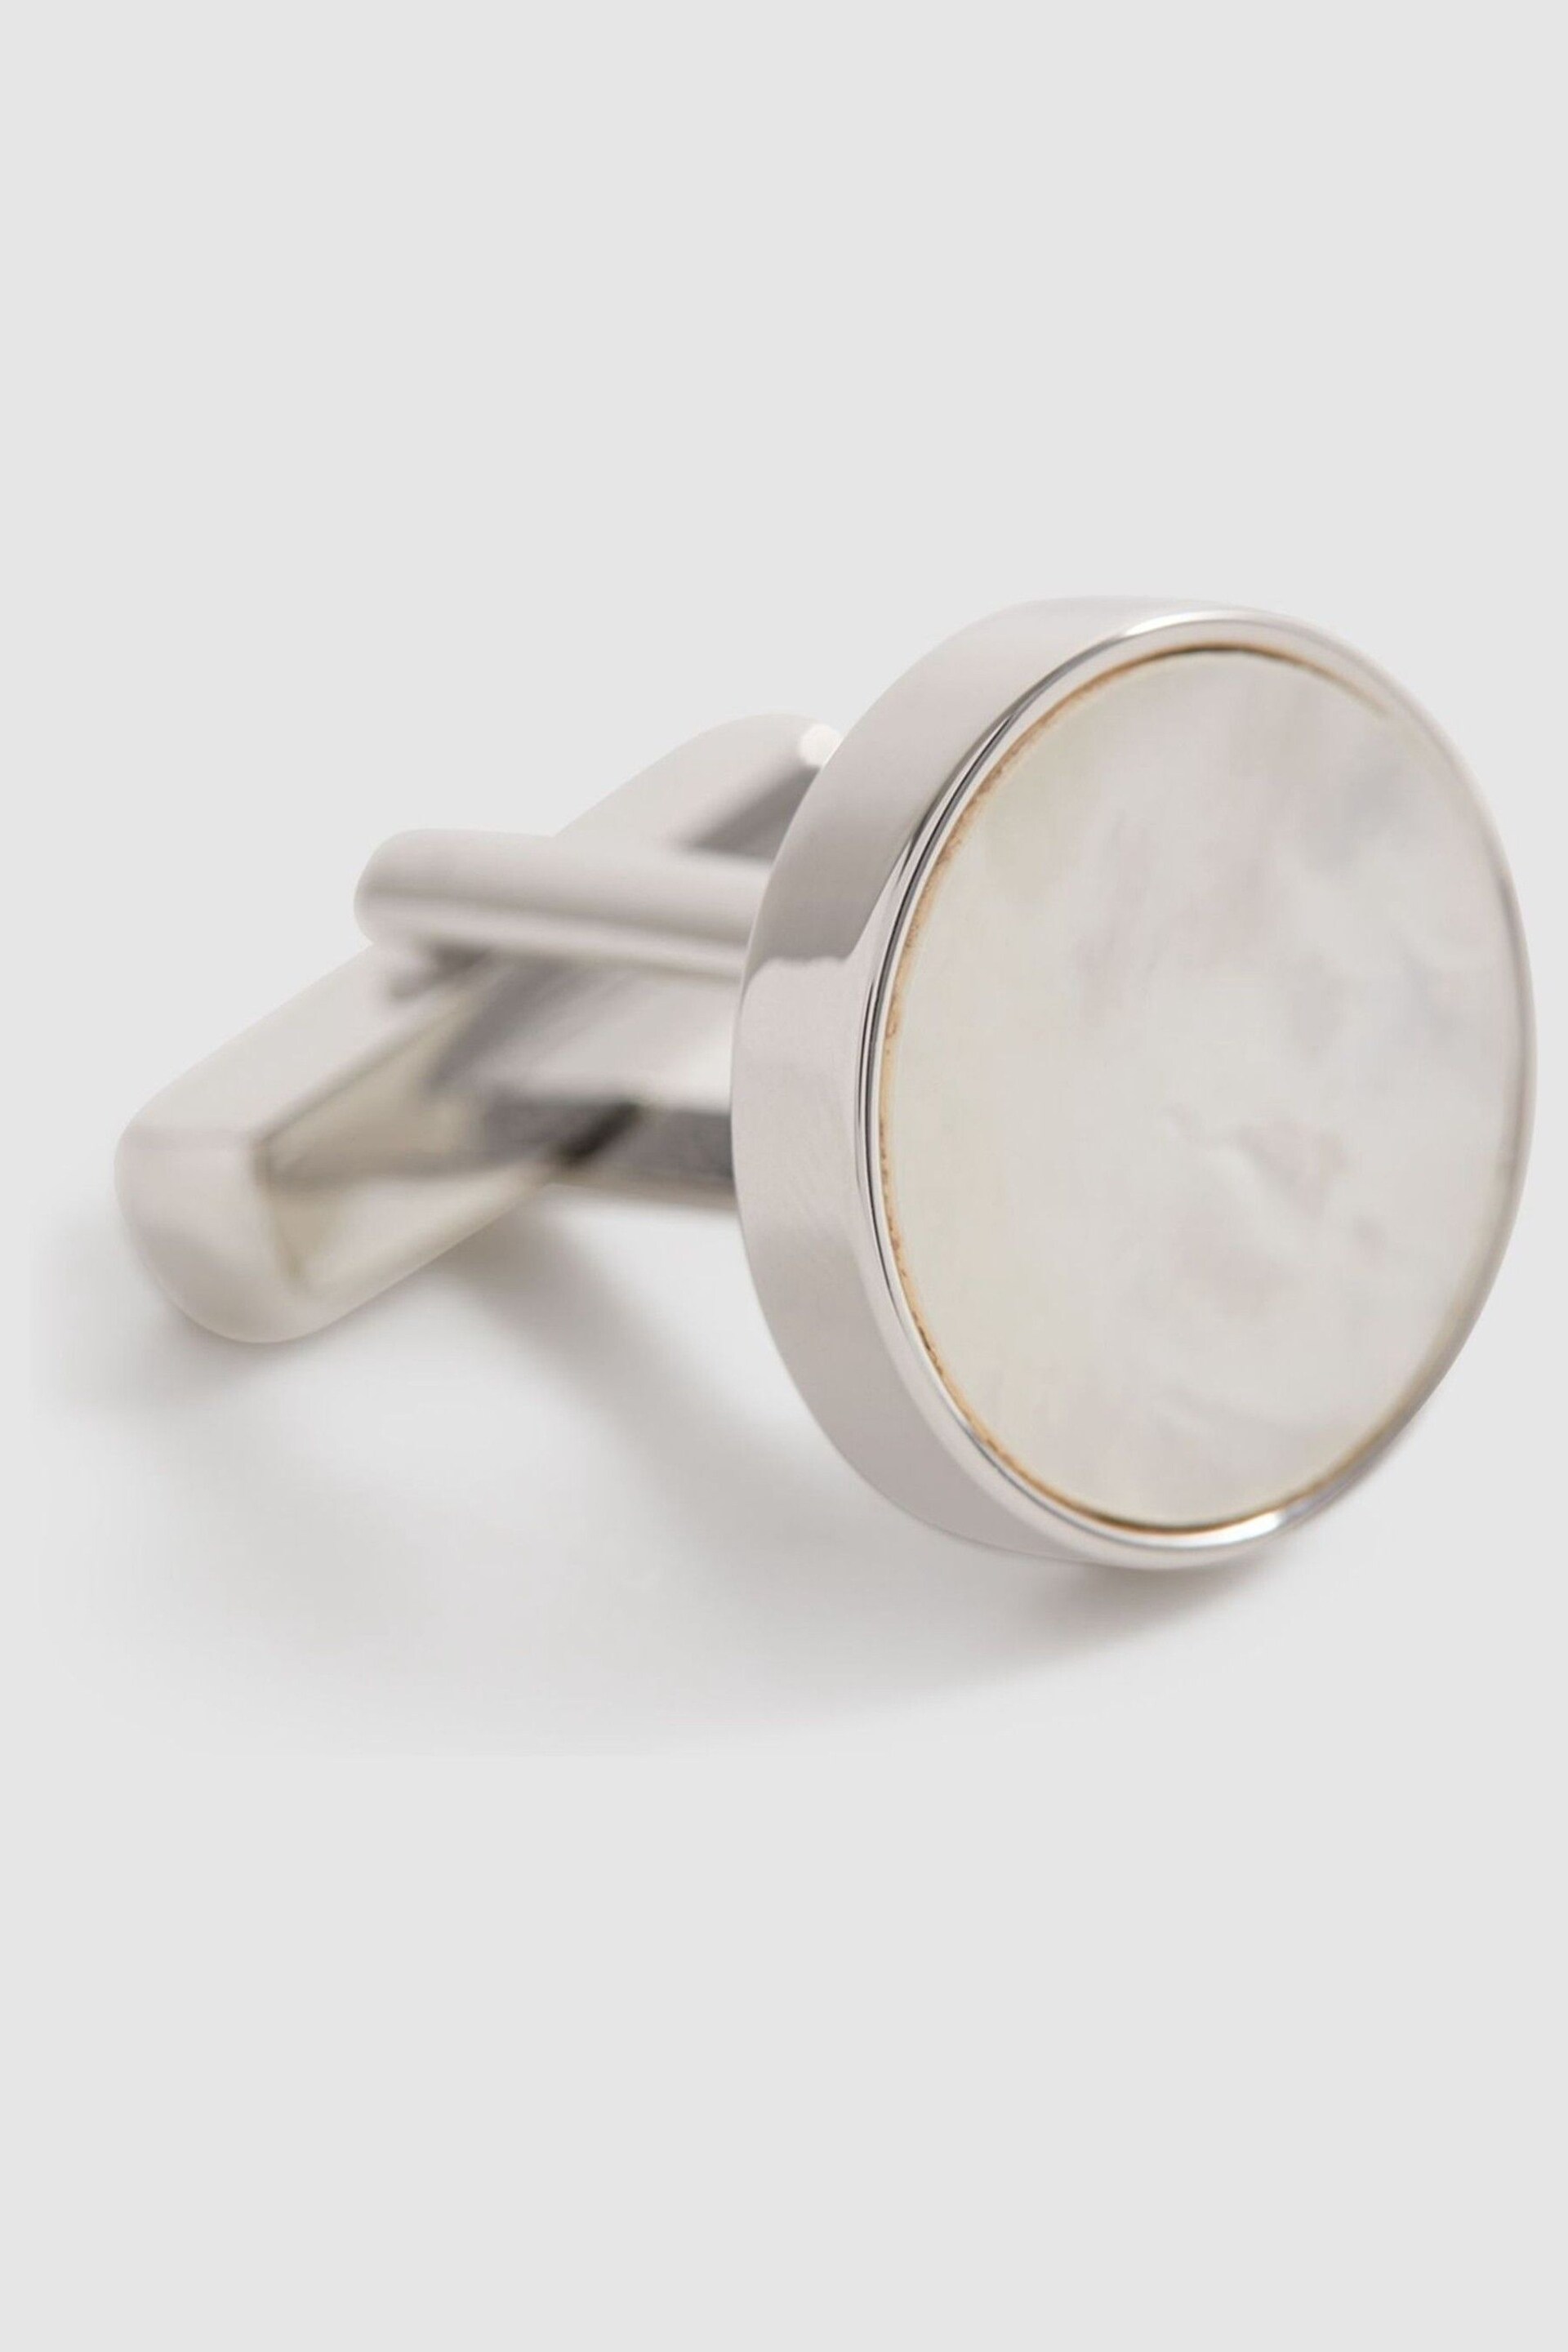 Reiss Silver/MOP Ardley Round Mother of Pearl Cufflinks - Image 4 of 5